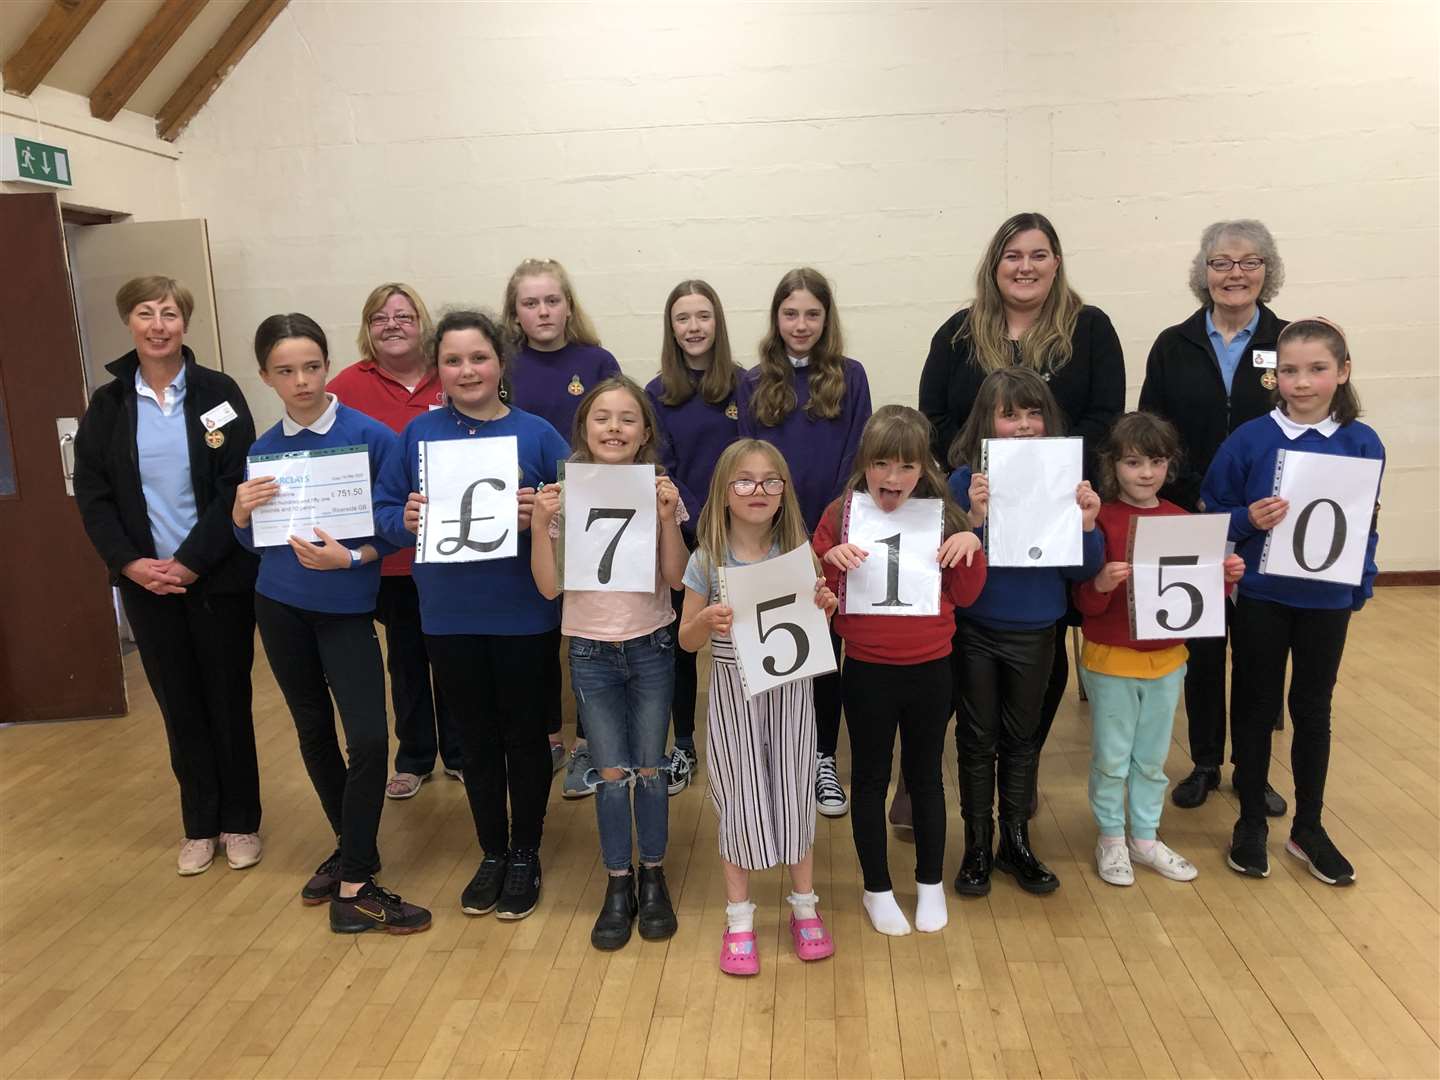 Members of Inverness Riverside Girls’ Brigade present a cheque to Katie Melville of Mikeysline.